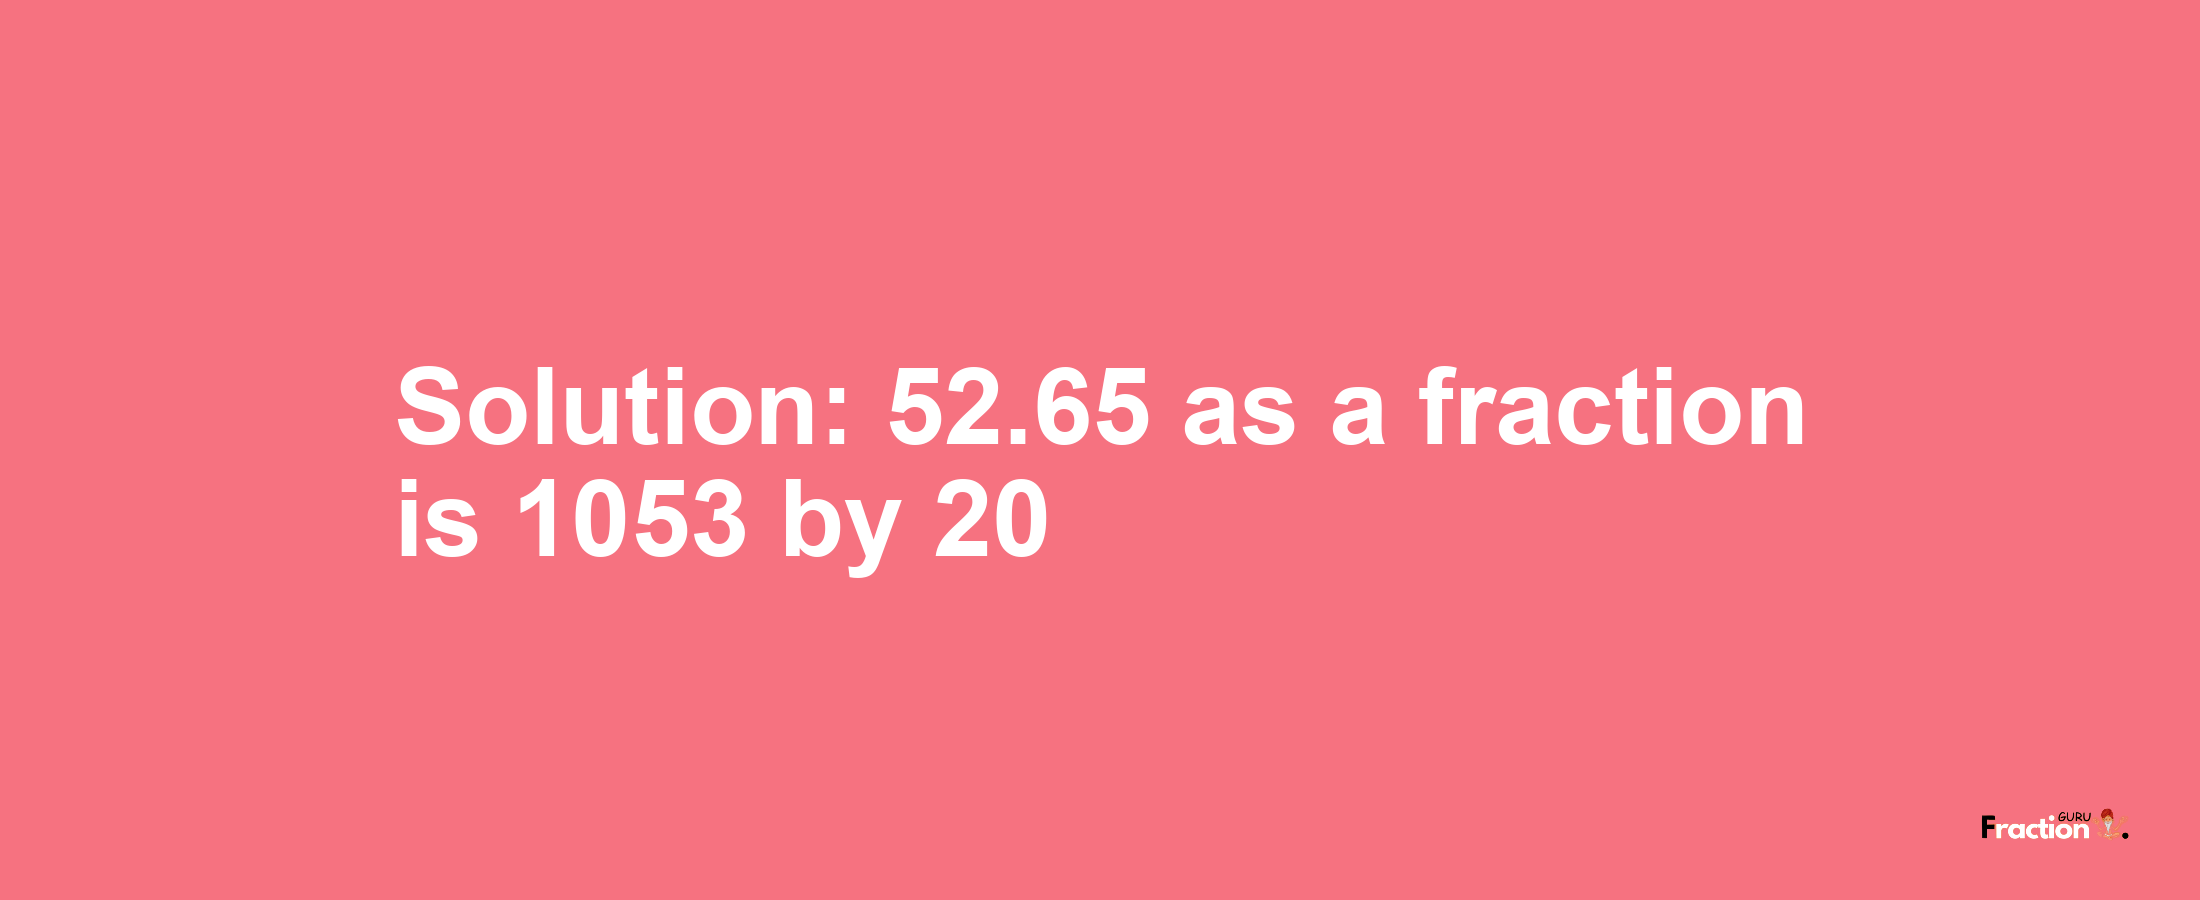 Solution:52.65 as a fraction is 1053/20